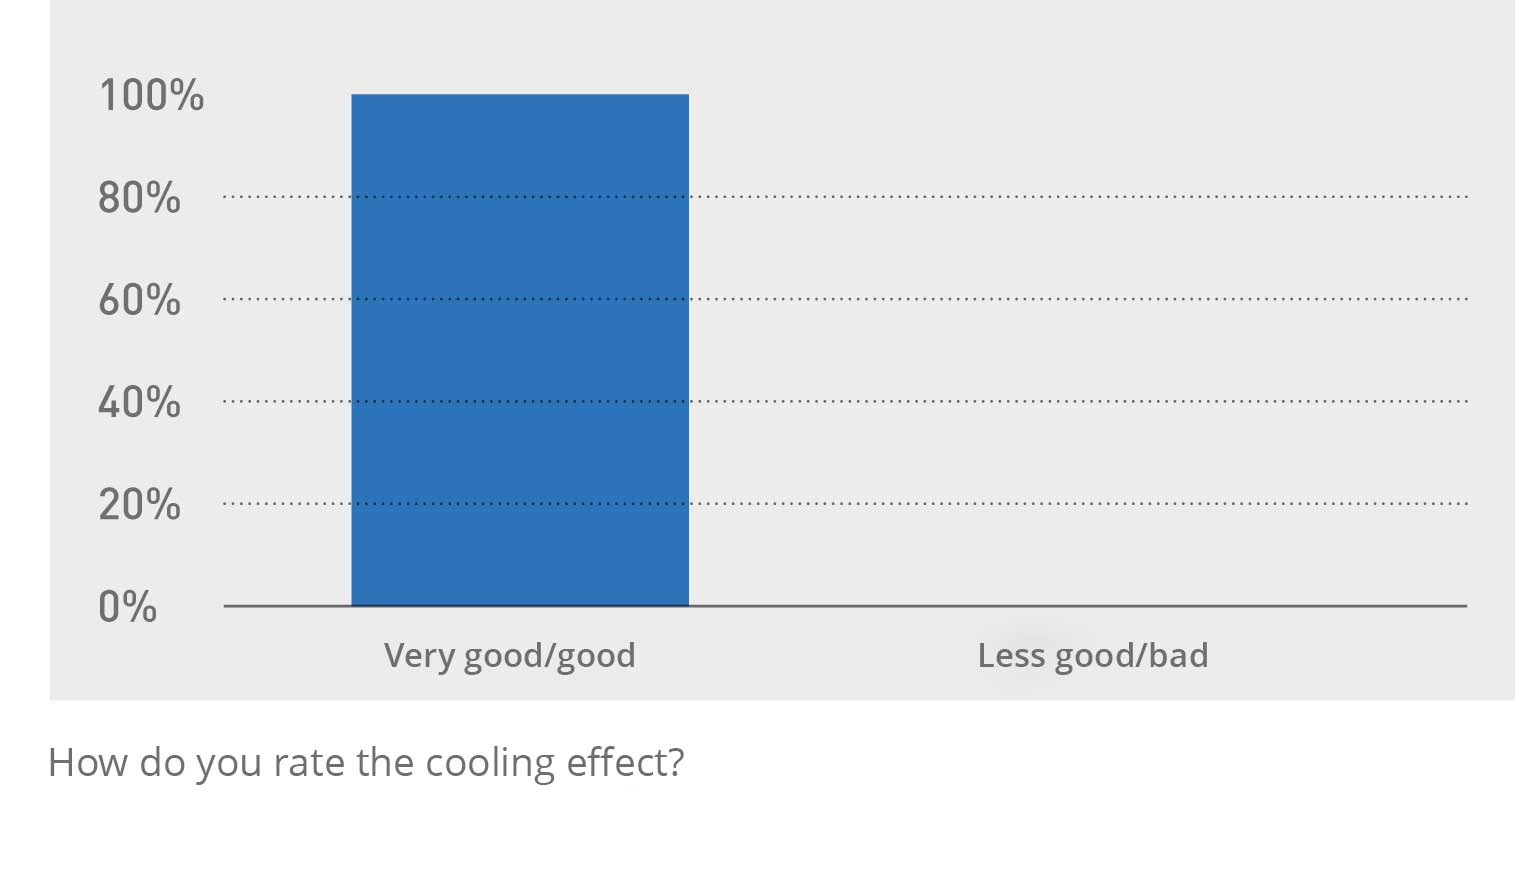 Graphic: E.COOLINE was rated "very good" and "good" by 97% of users.